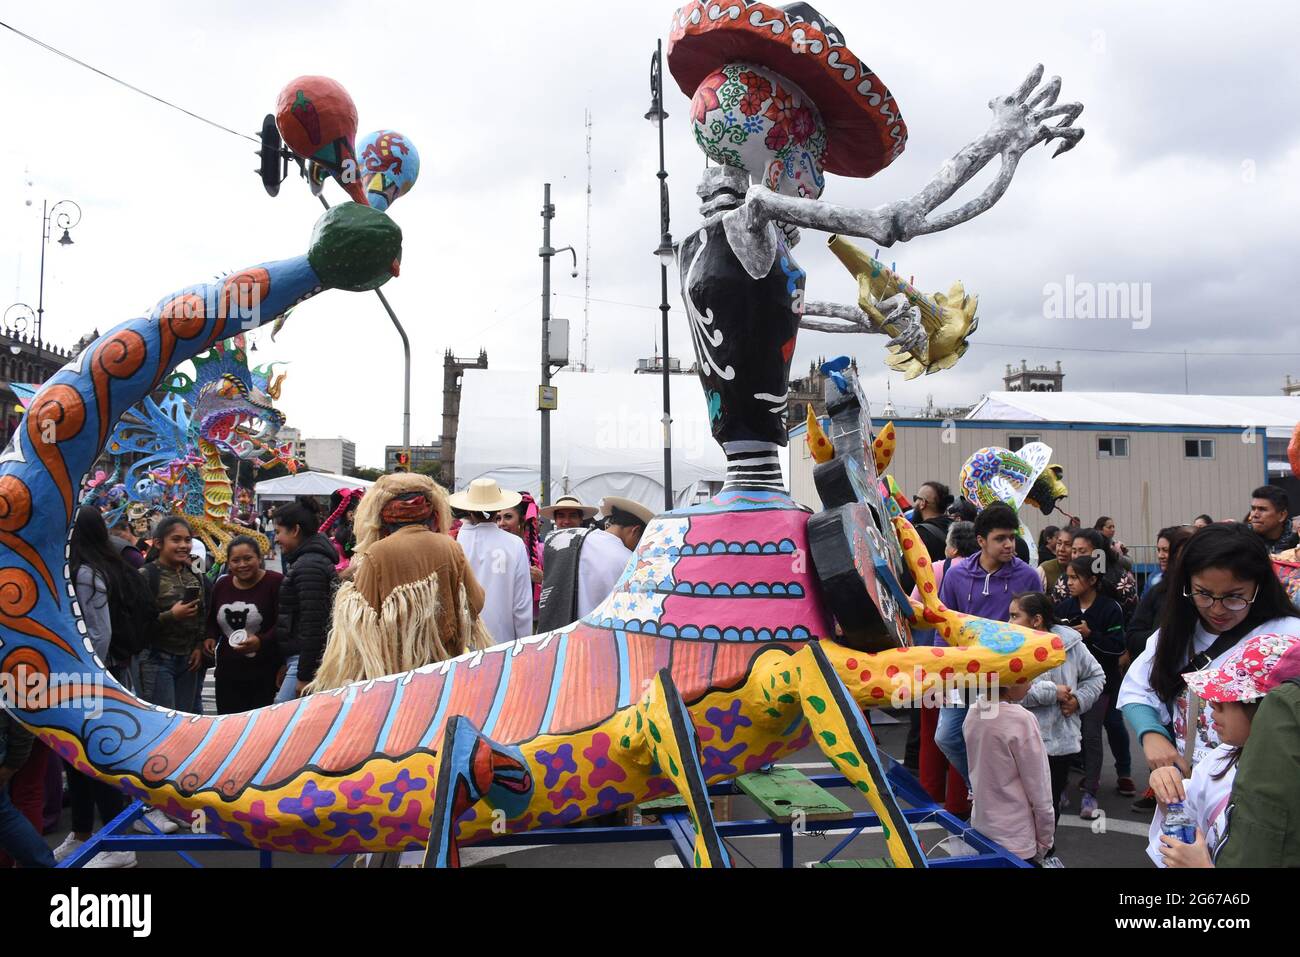 A large alebrije figure in the Day of the Dead parade in the zocalo in Mexico City. Stock Photo